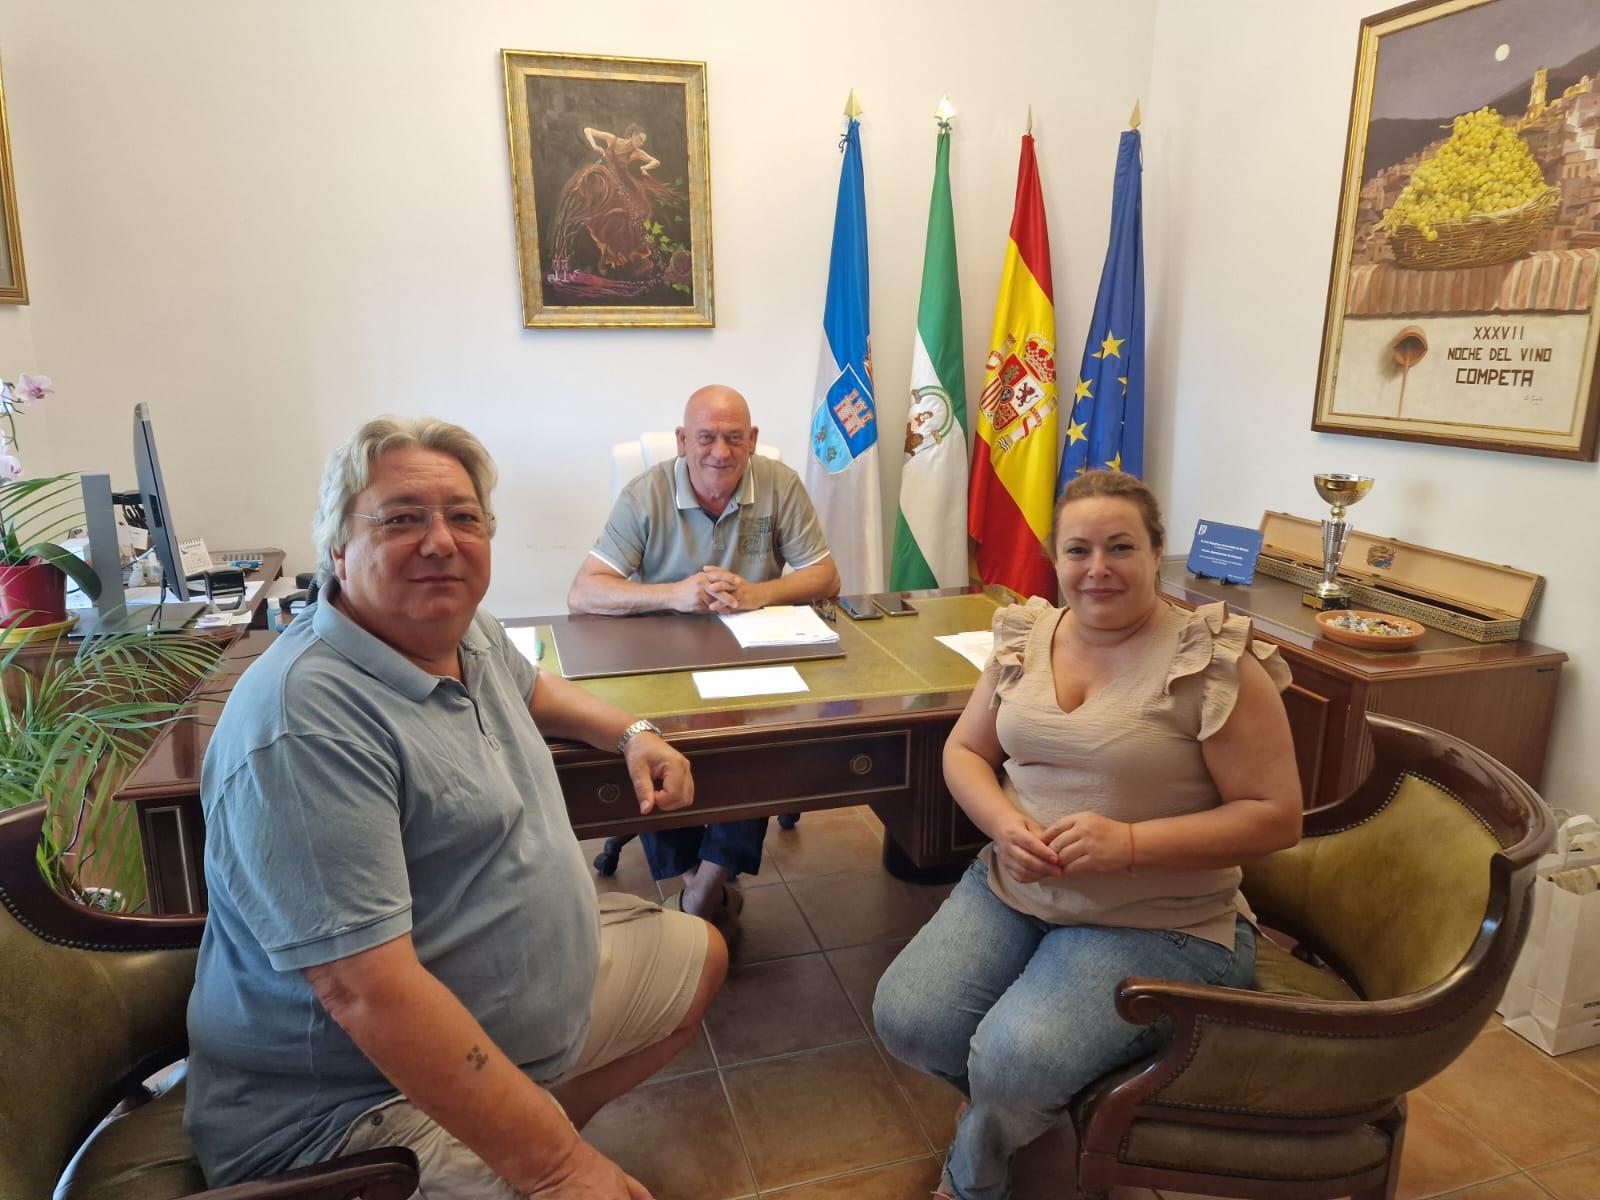 Andy Haxby, CEO of Competa IT, visits the Mayor of Cómpeta in Spain